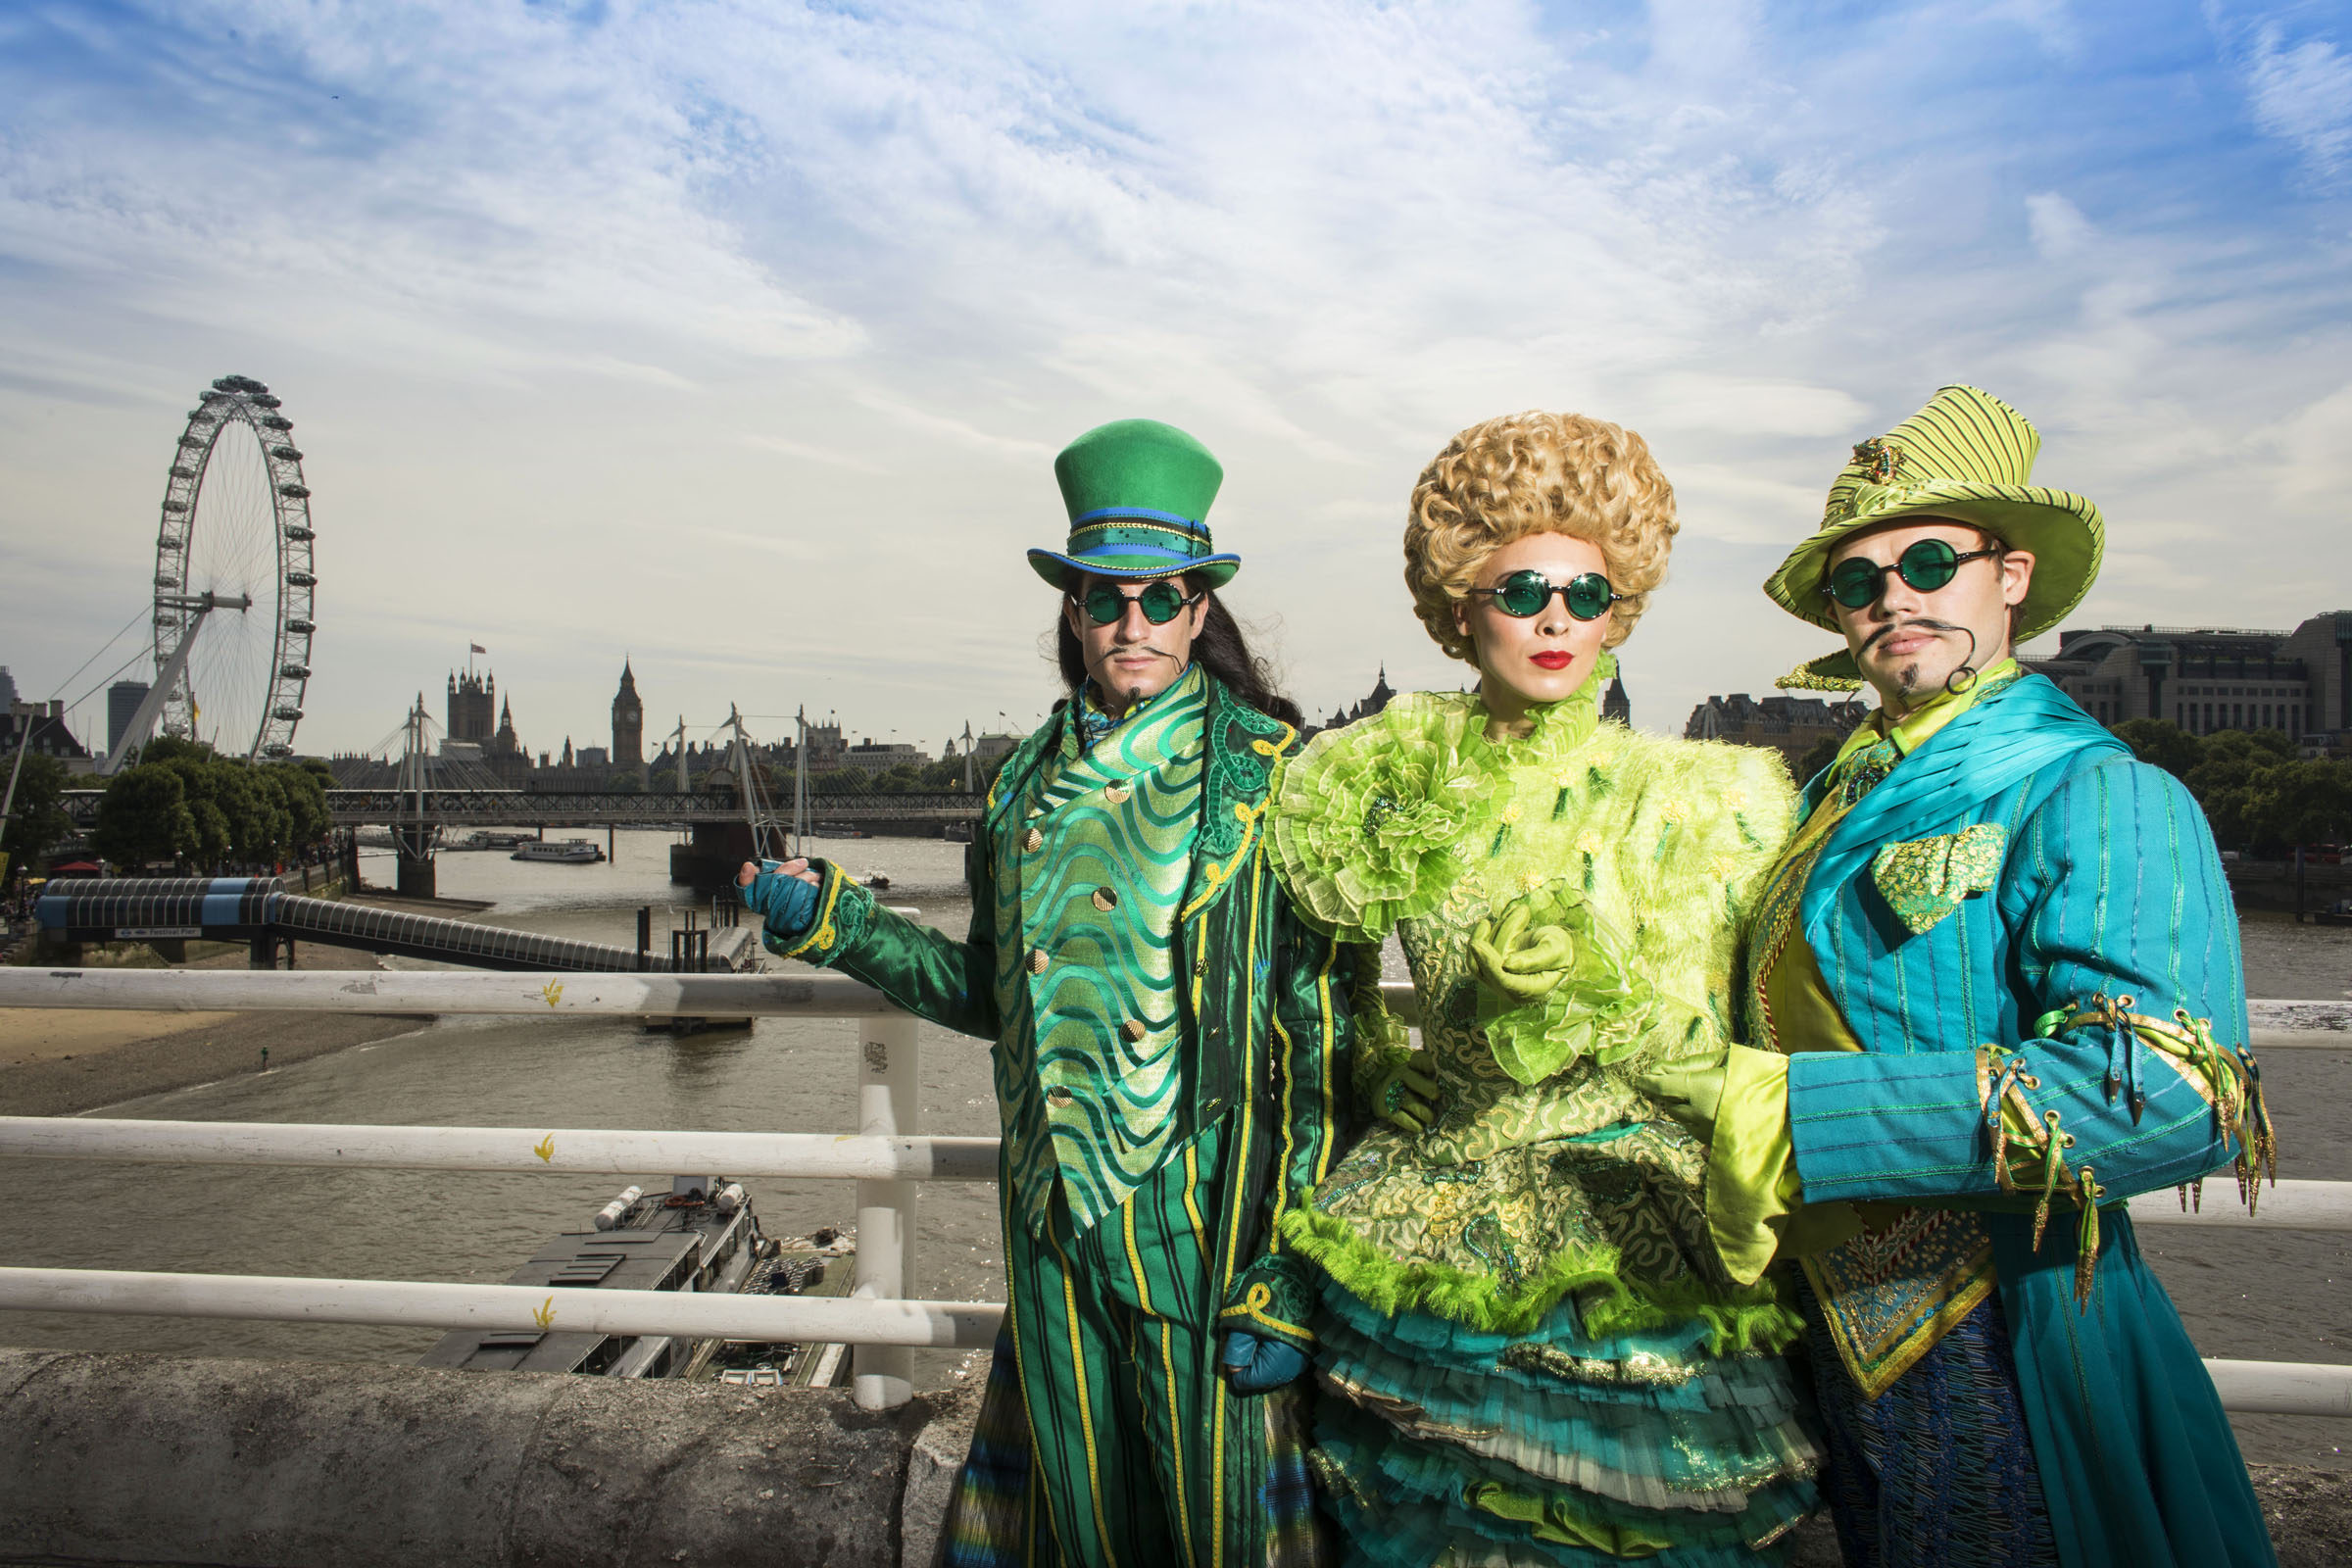 Wicked the Musical cast members overlooking the Thames